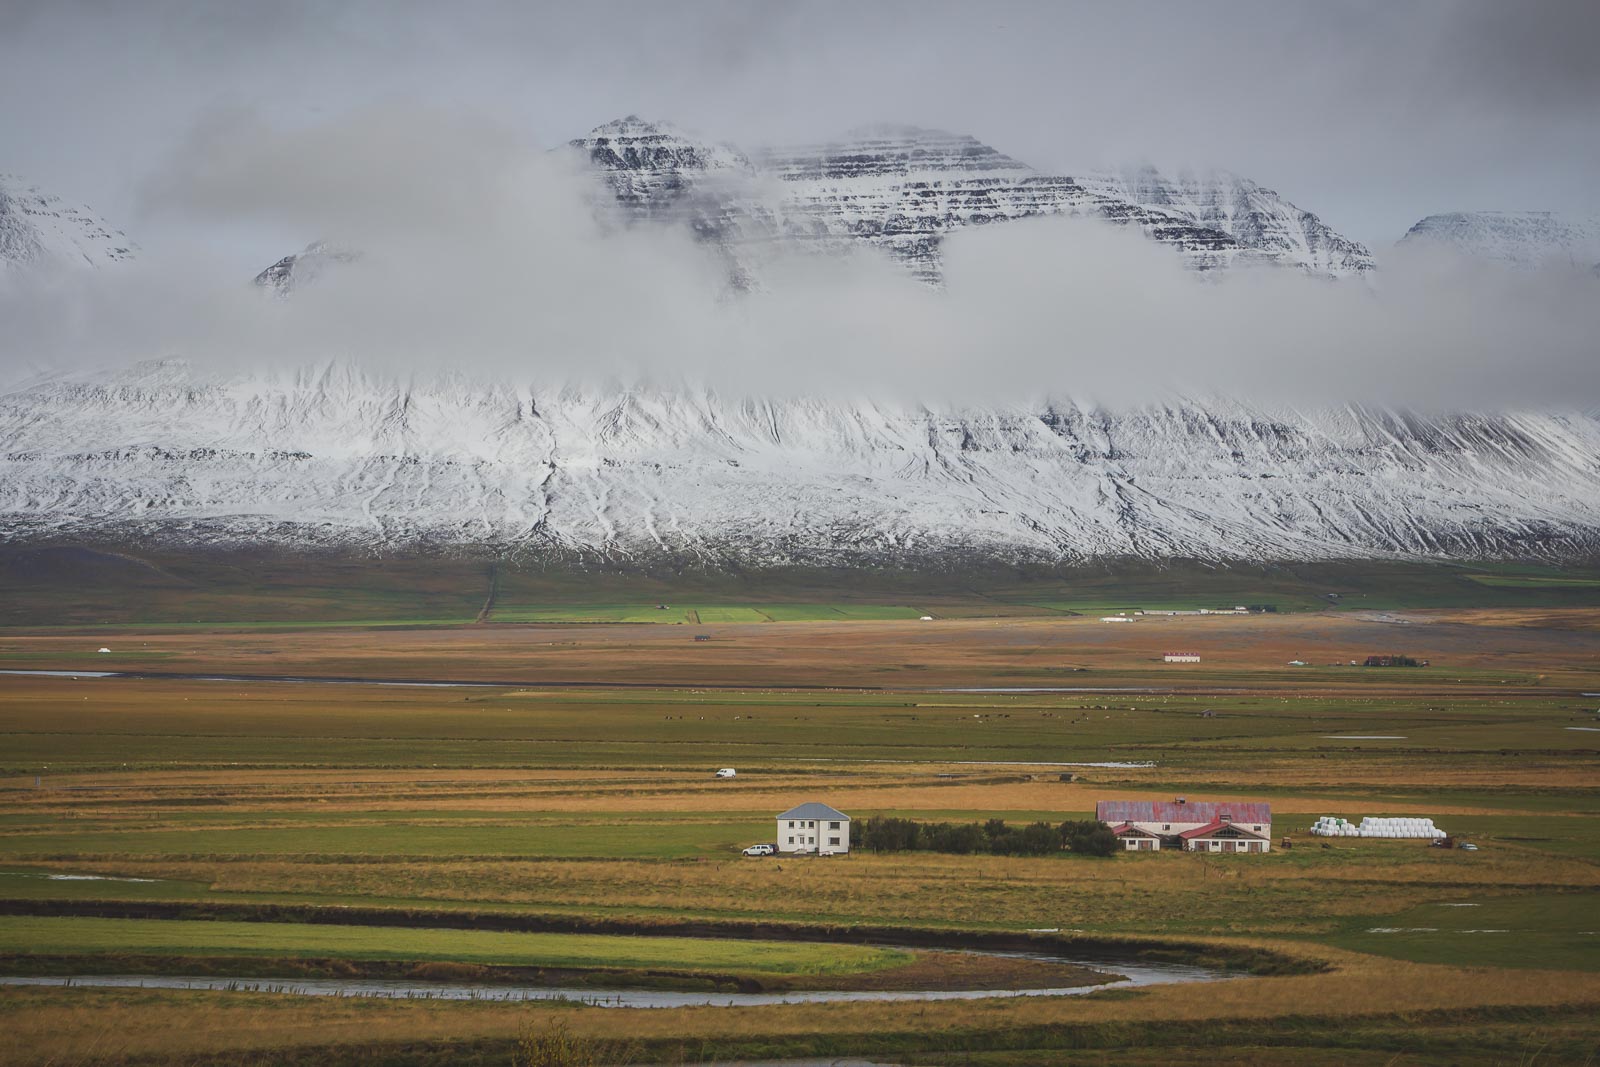 Iceland is scarce on trees